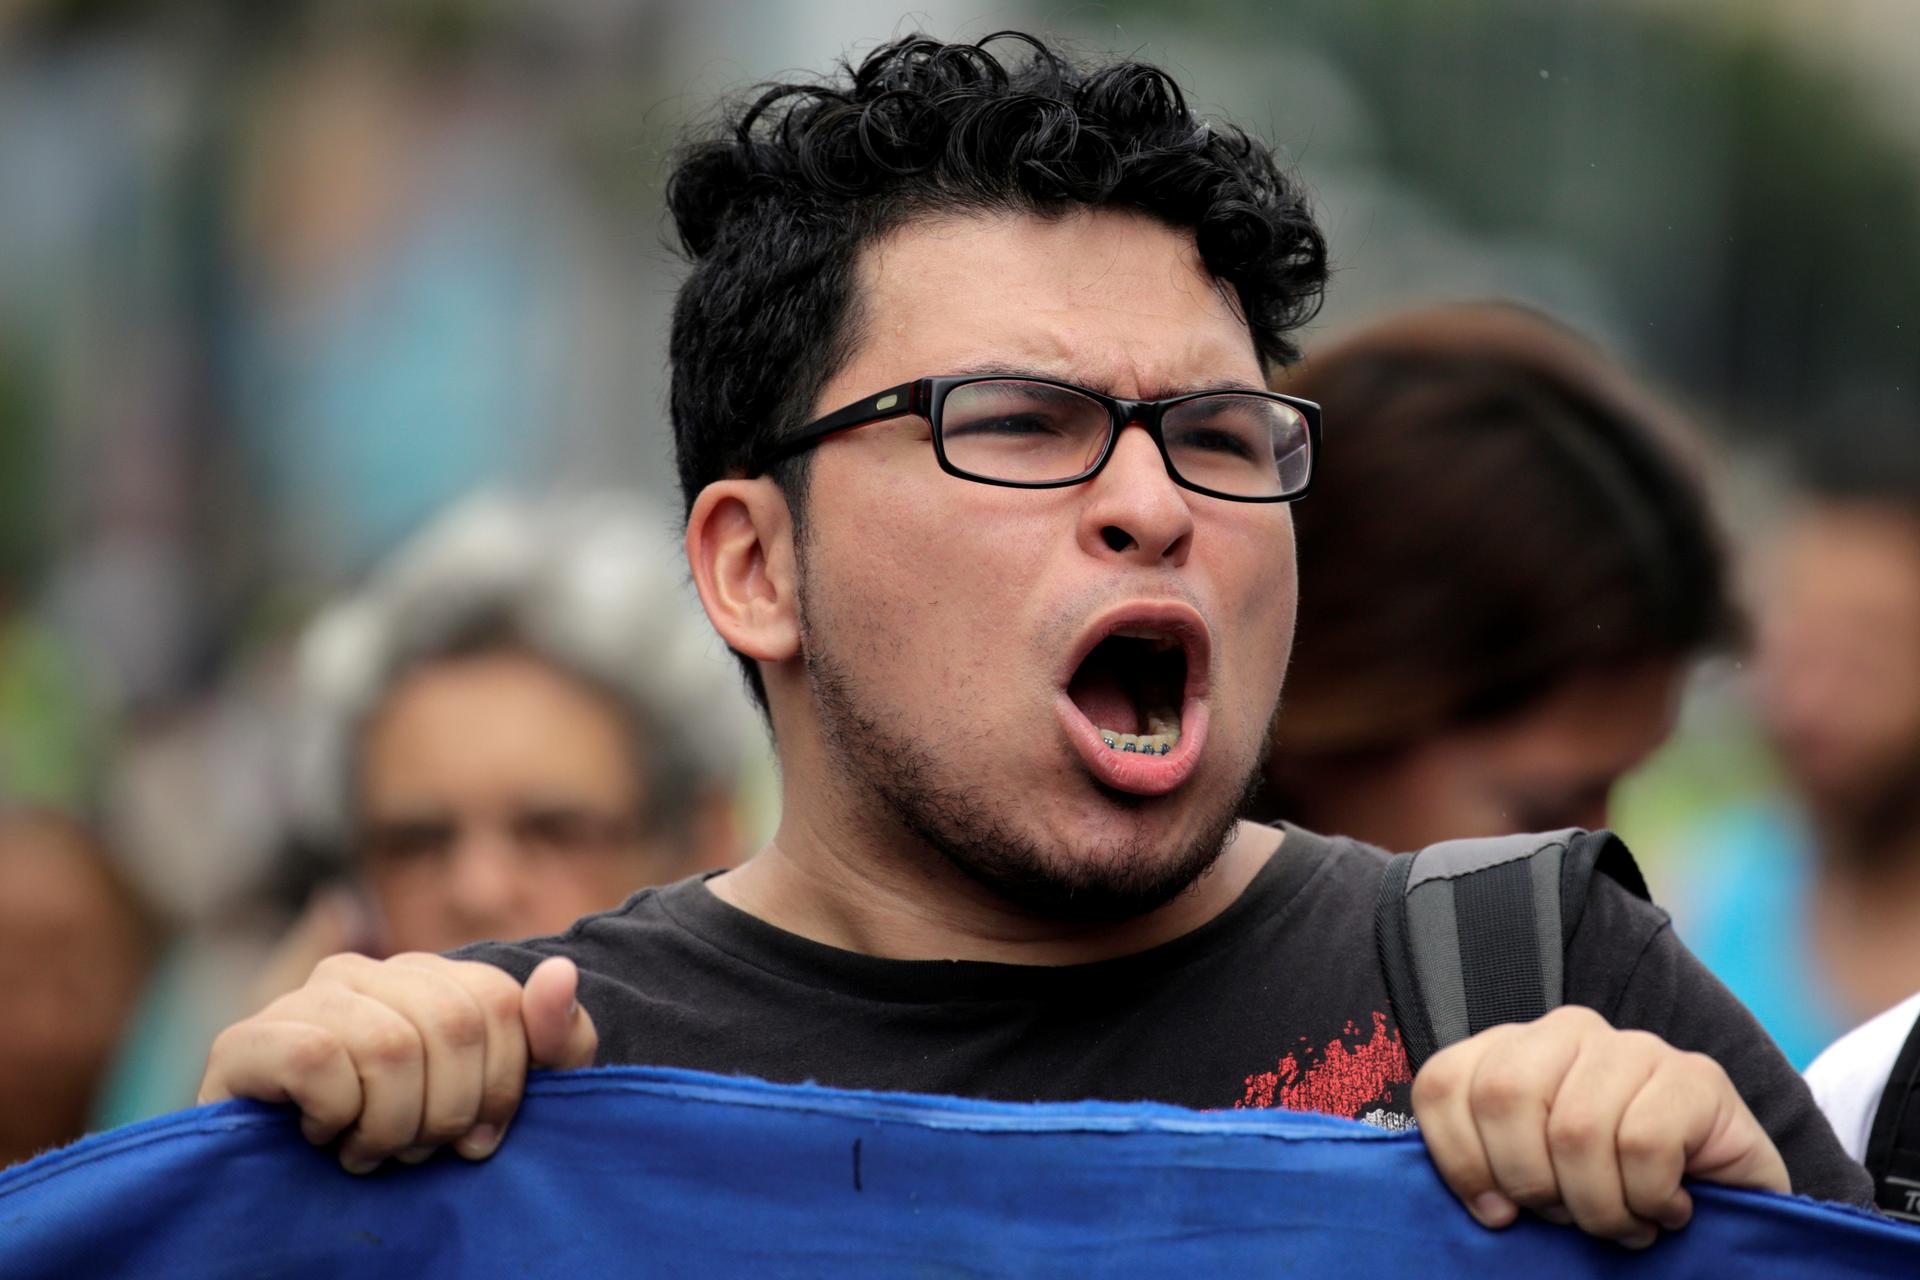 Demonstrators have accused the government of Venezuelan President Nicolas Maduro of systemic corruption.